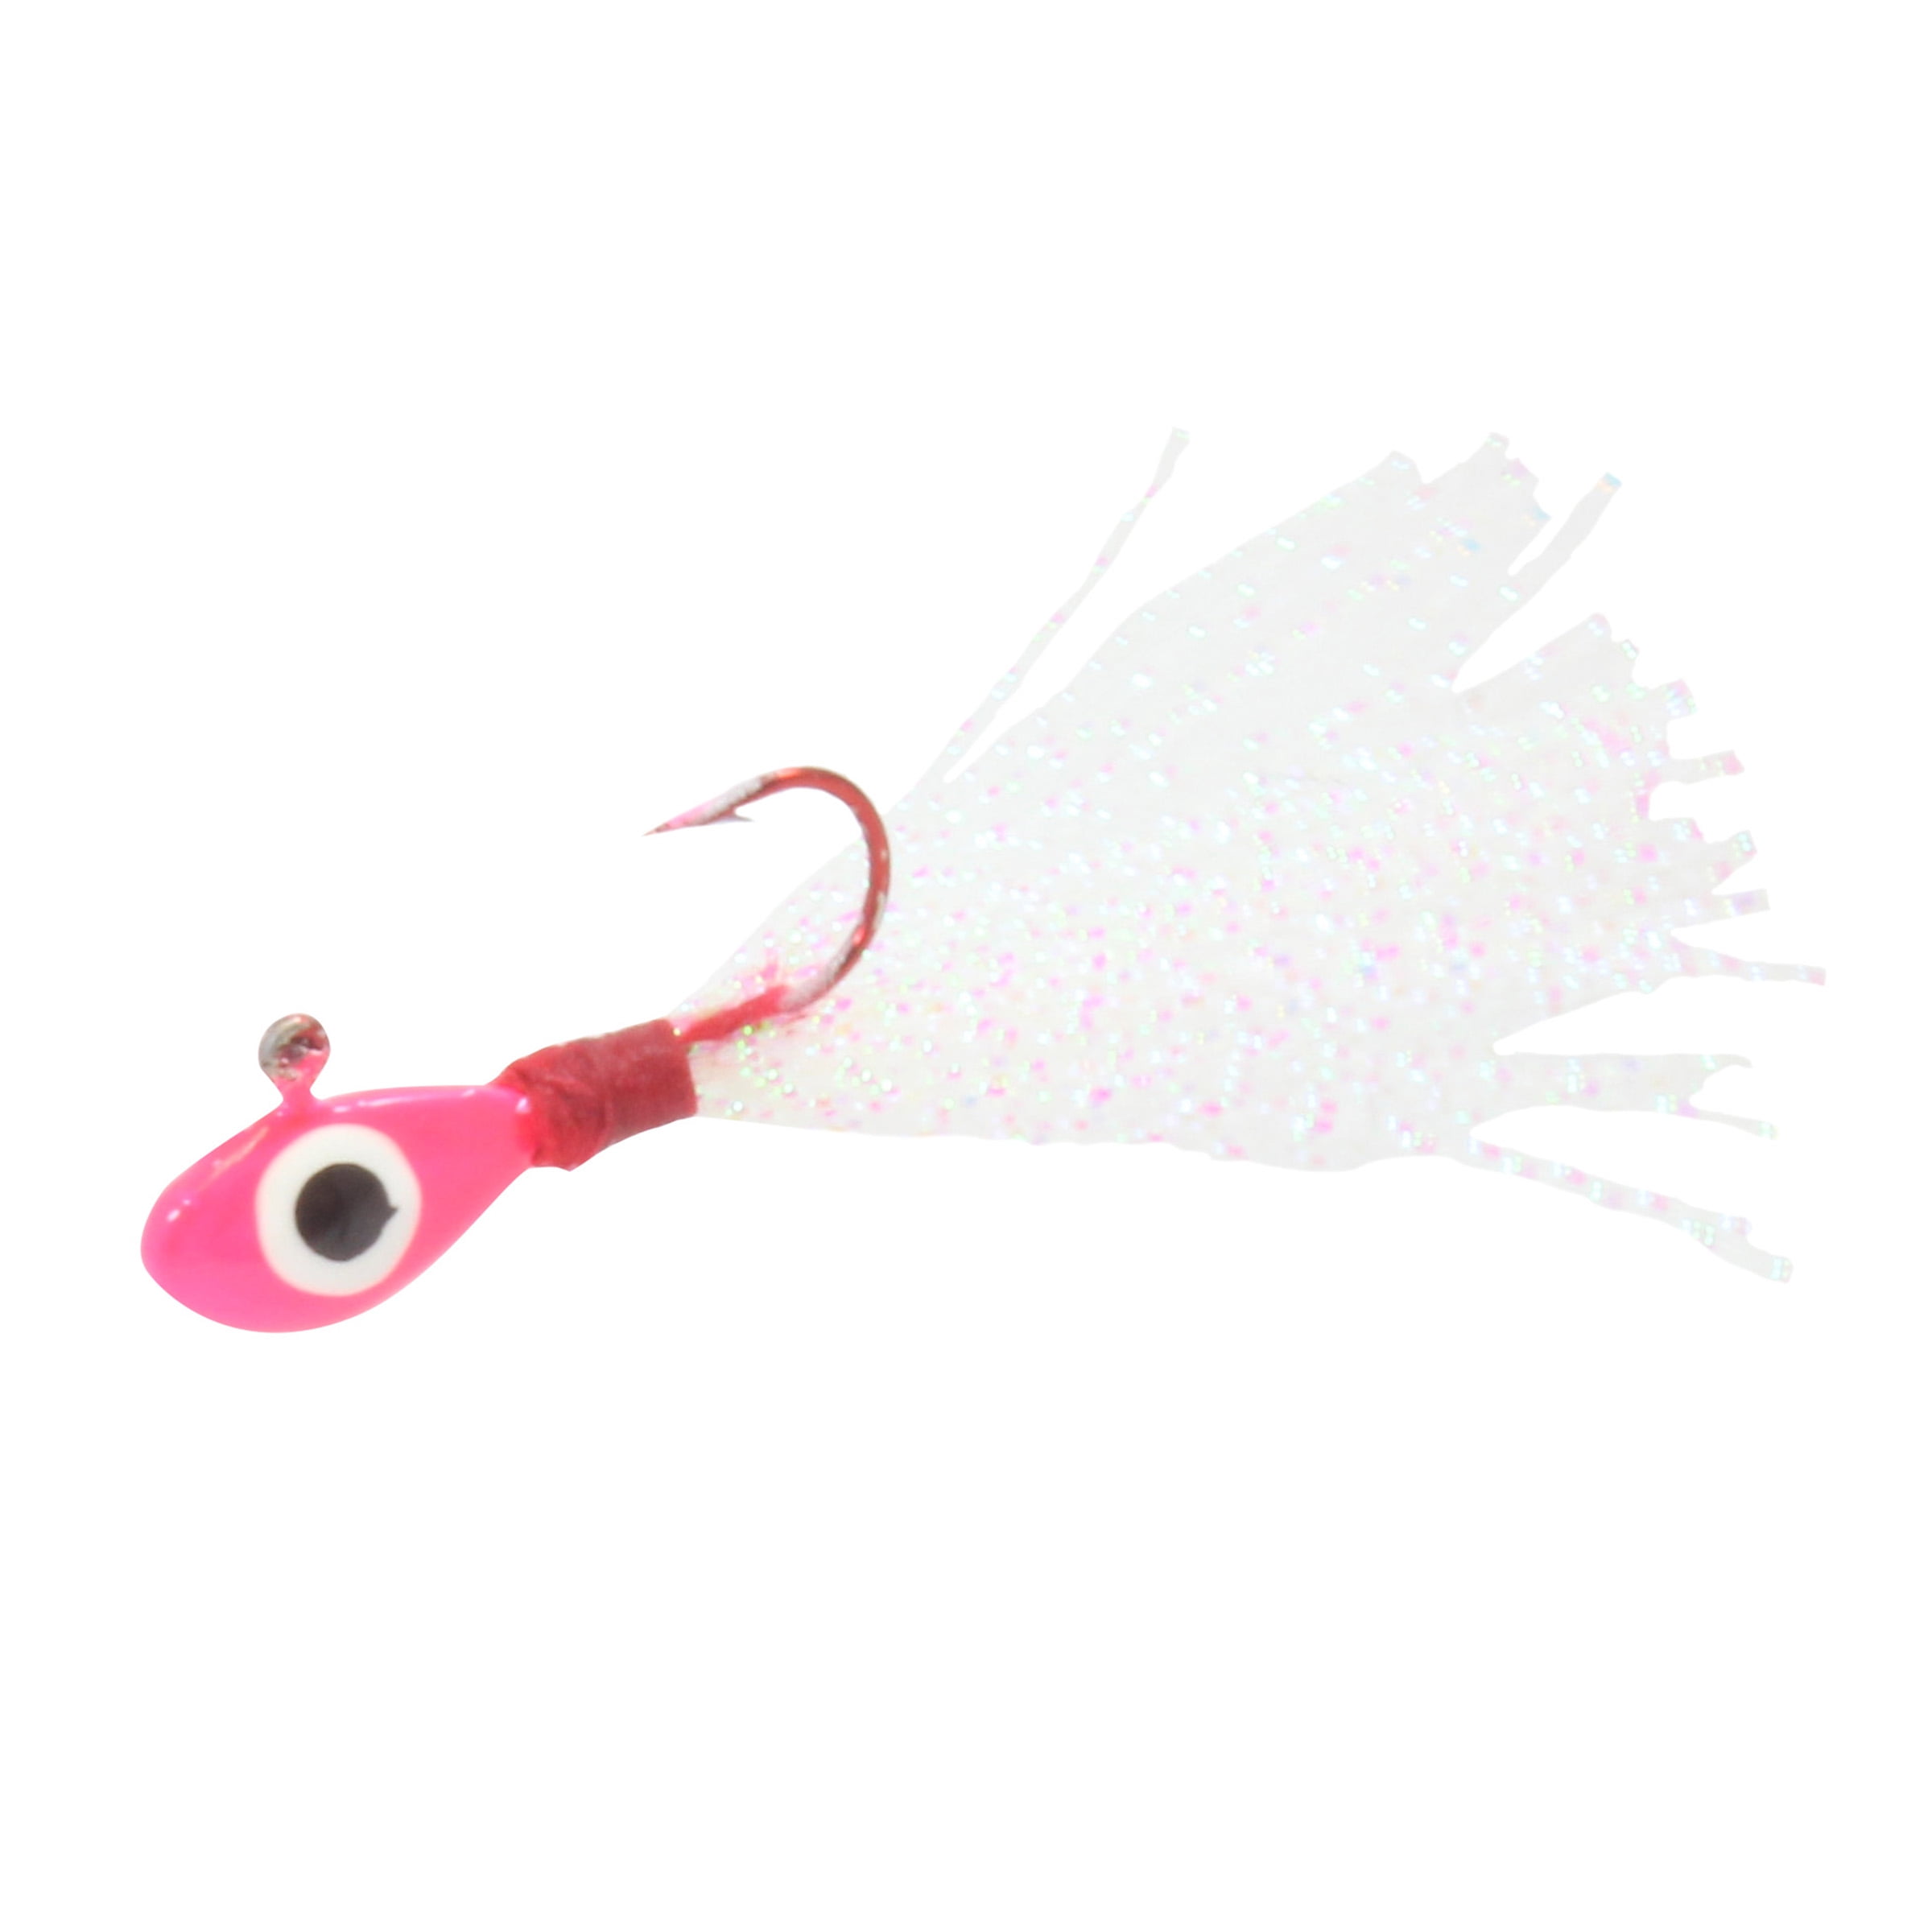 Northland Tackle Gypsi Jig, Feather Jig, Freshwater, Pink/White 